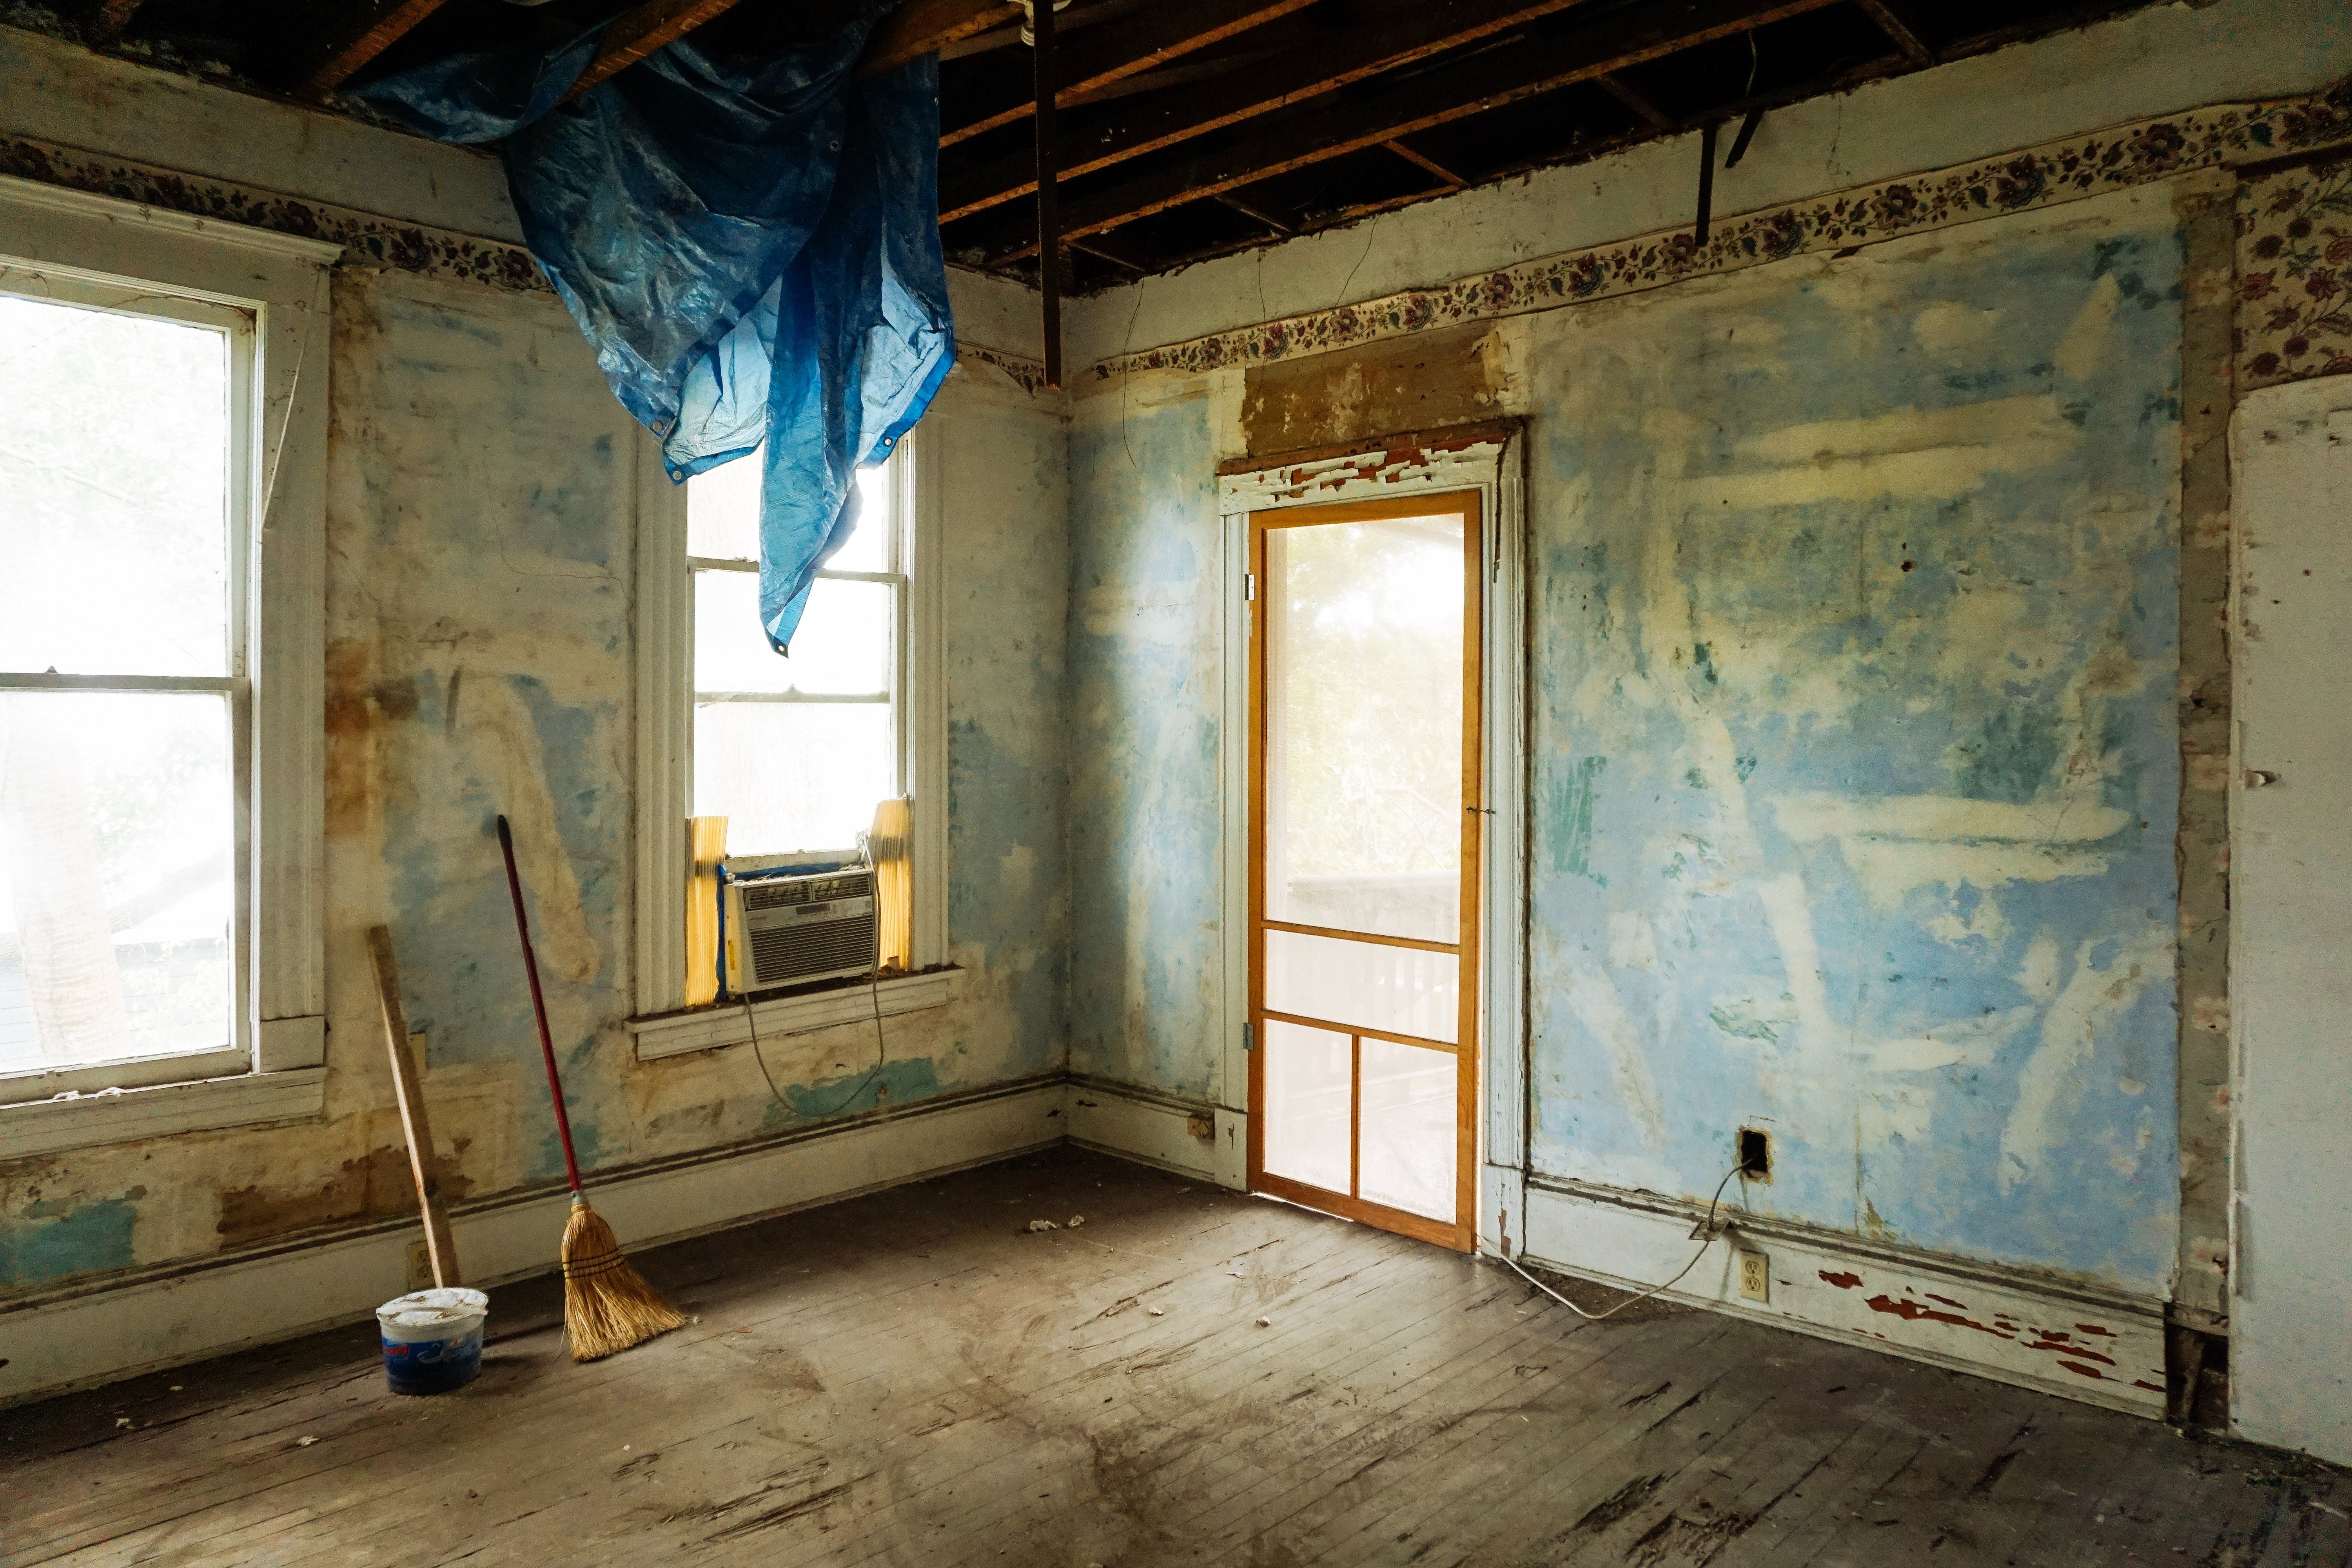 Adam was surprised to see their house abandoned. | Photo: Pexels